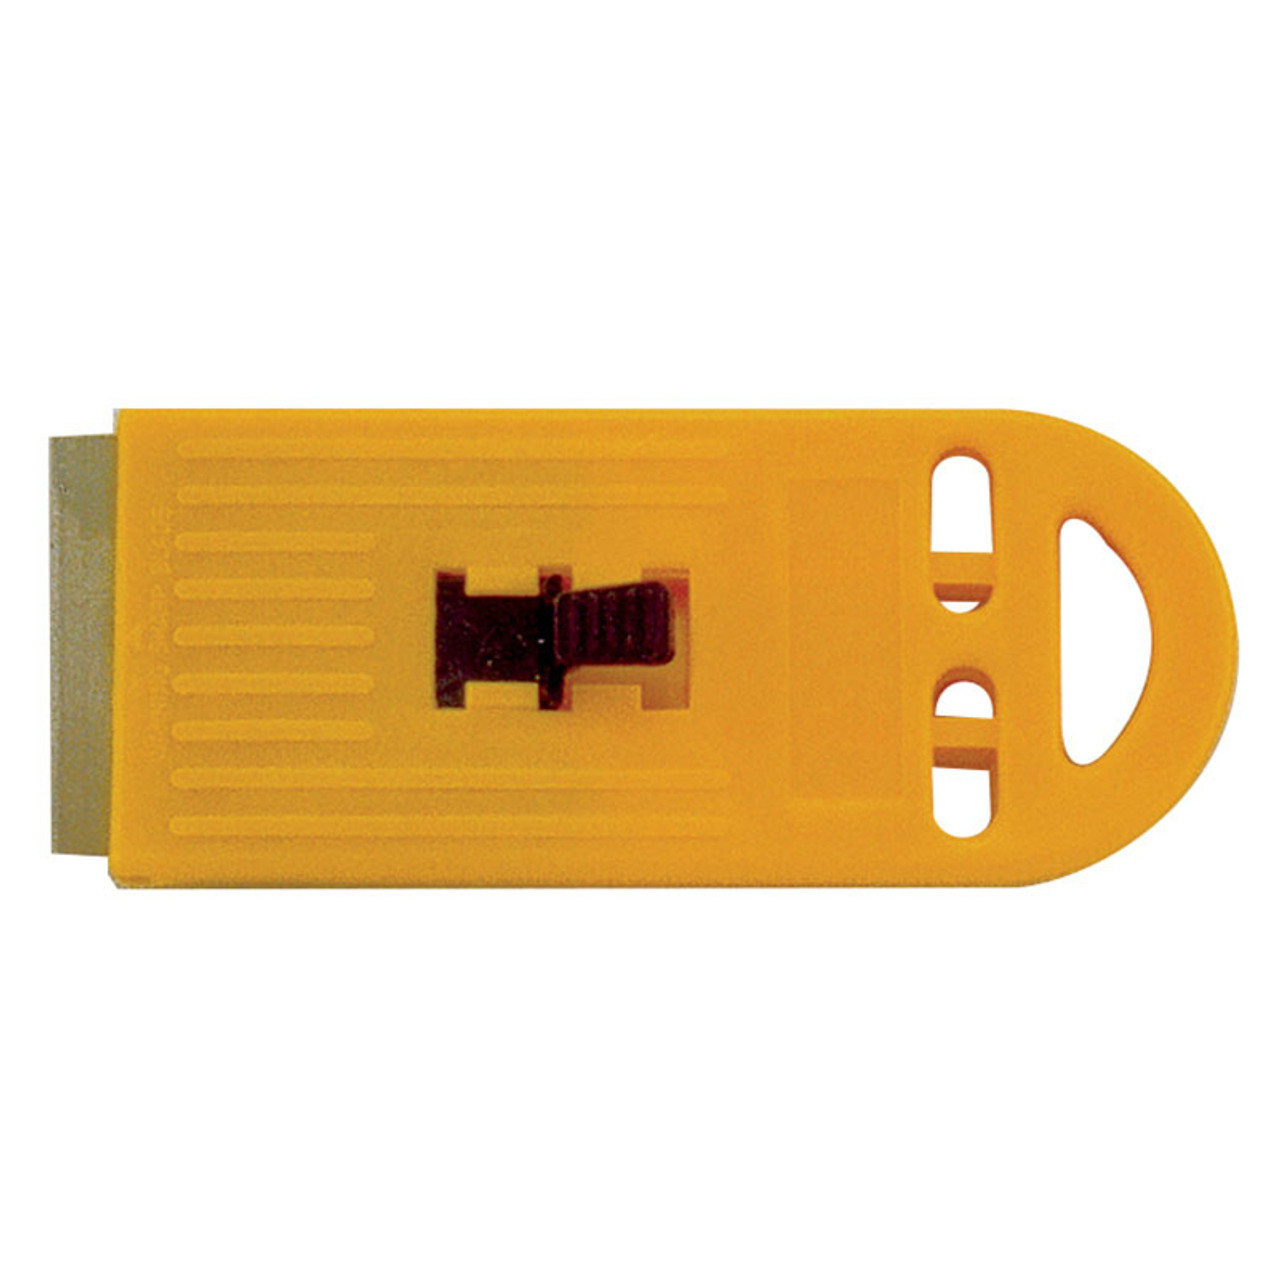 Yellow Plastic Scraper With 1 Blade(Carded)